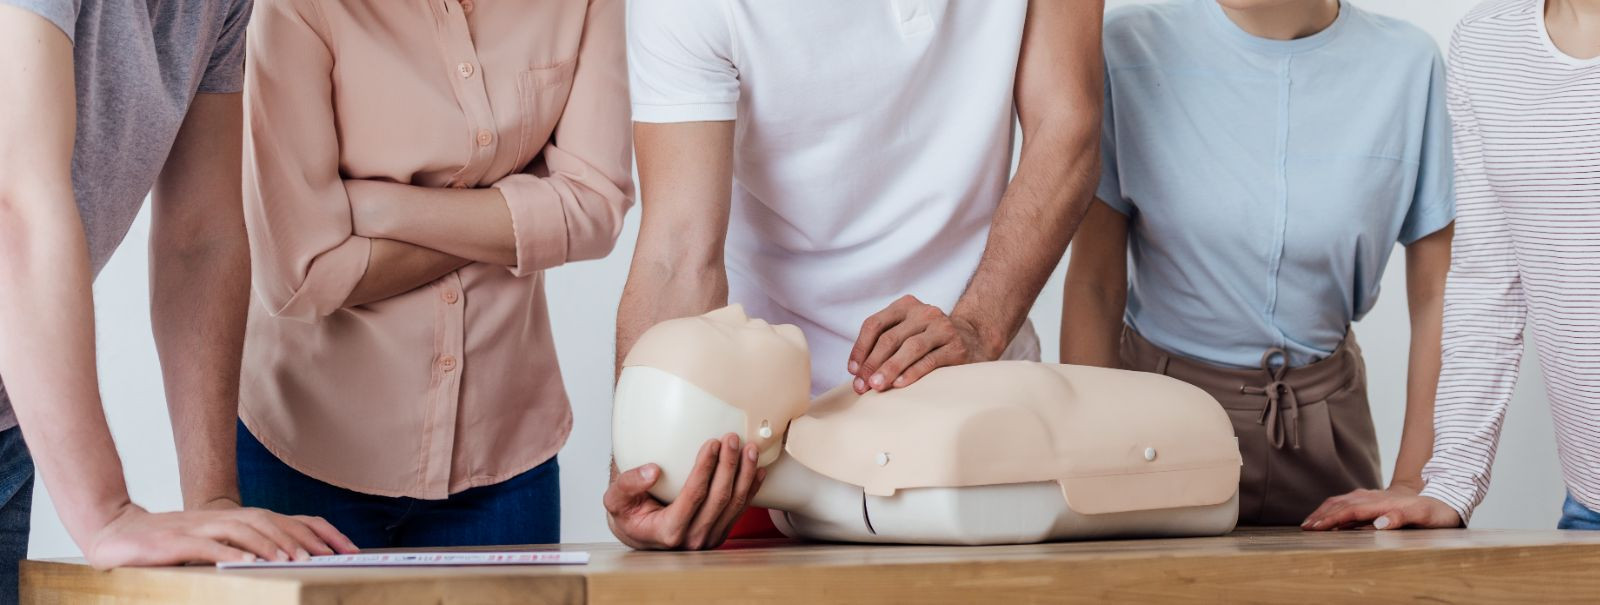 Emergencies can occur at any time and in any place, and being equipped with essential first aid skills can make a significant difference in the outcome of an ac